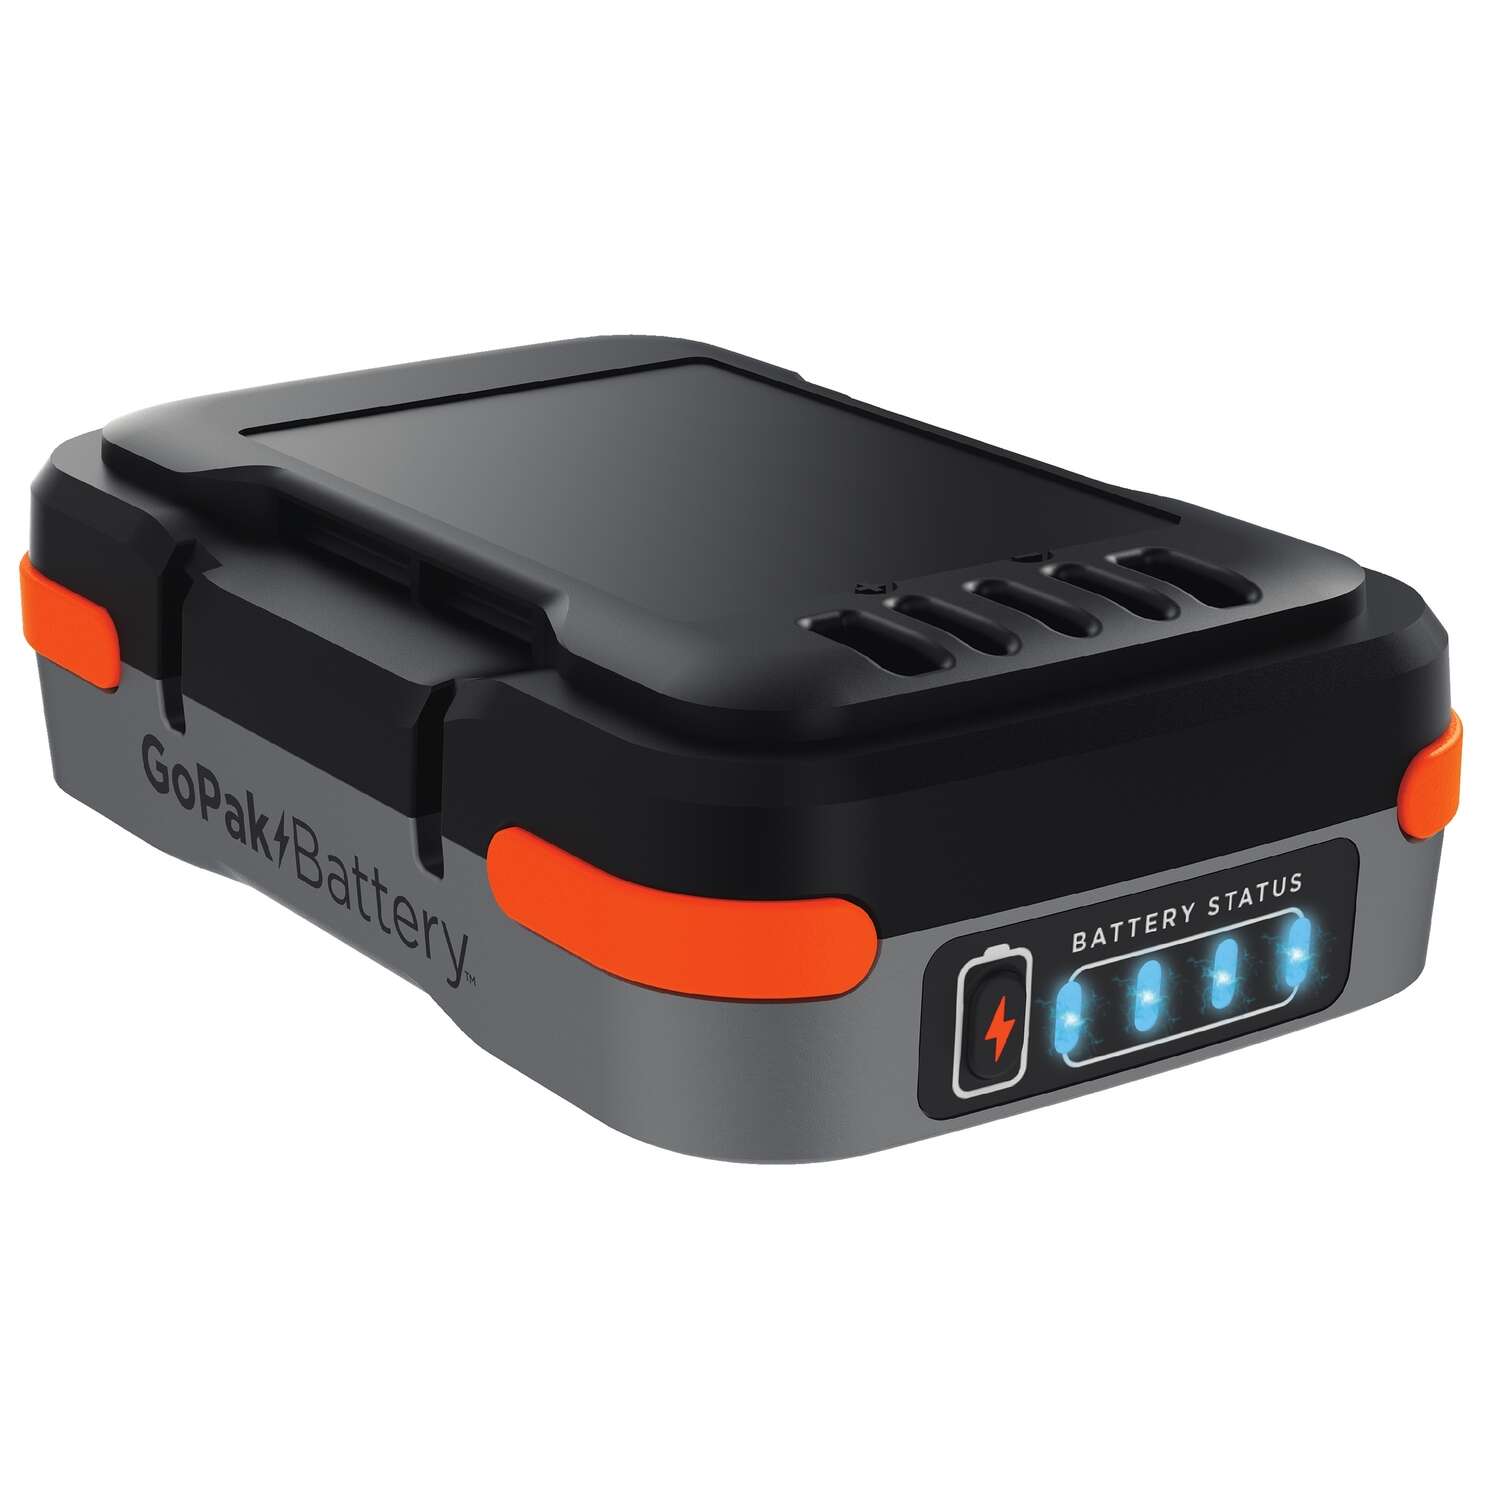 Black and Decker GoPak 12 volt 1.5 Ah Lithium-Ion Battery and USB Charger 1 pc. $7.99